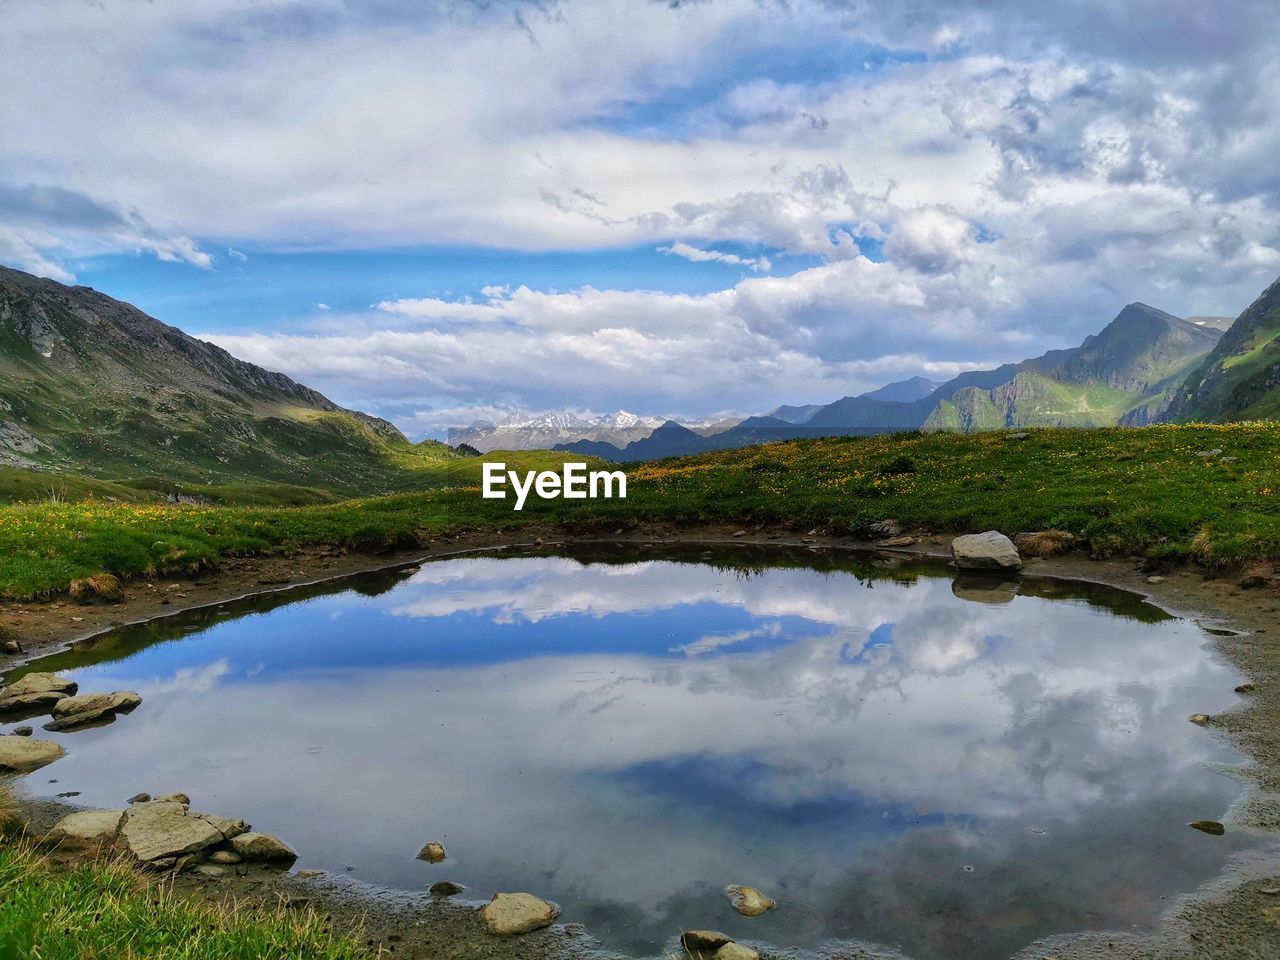 scenic view of lake by mountains against sky